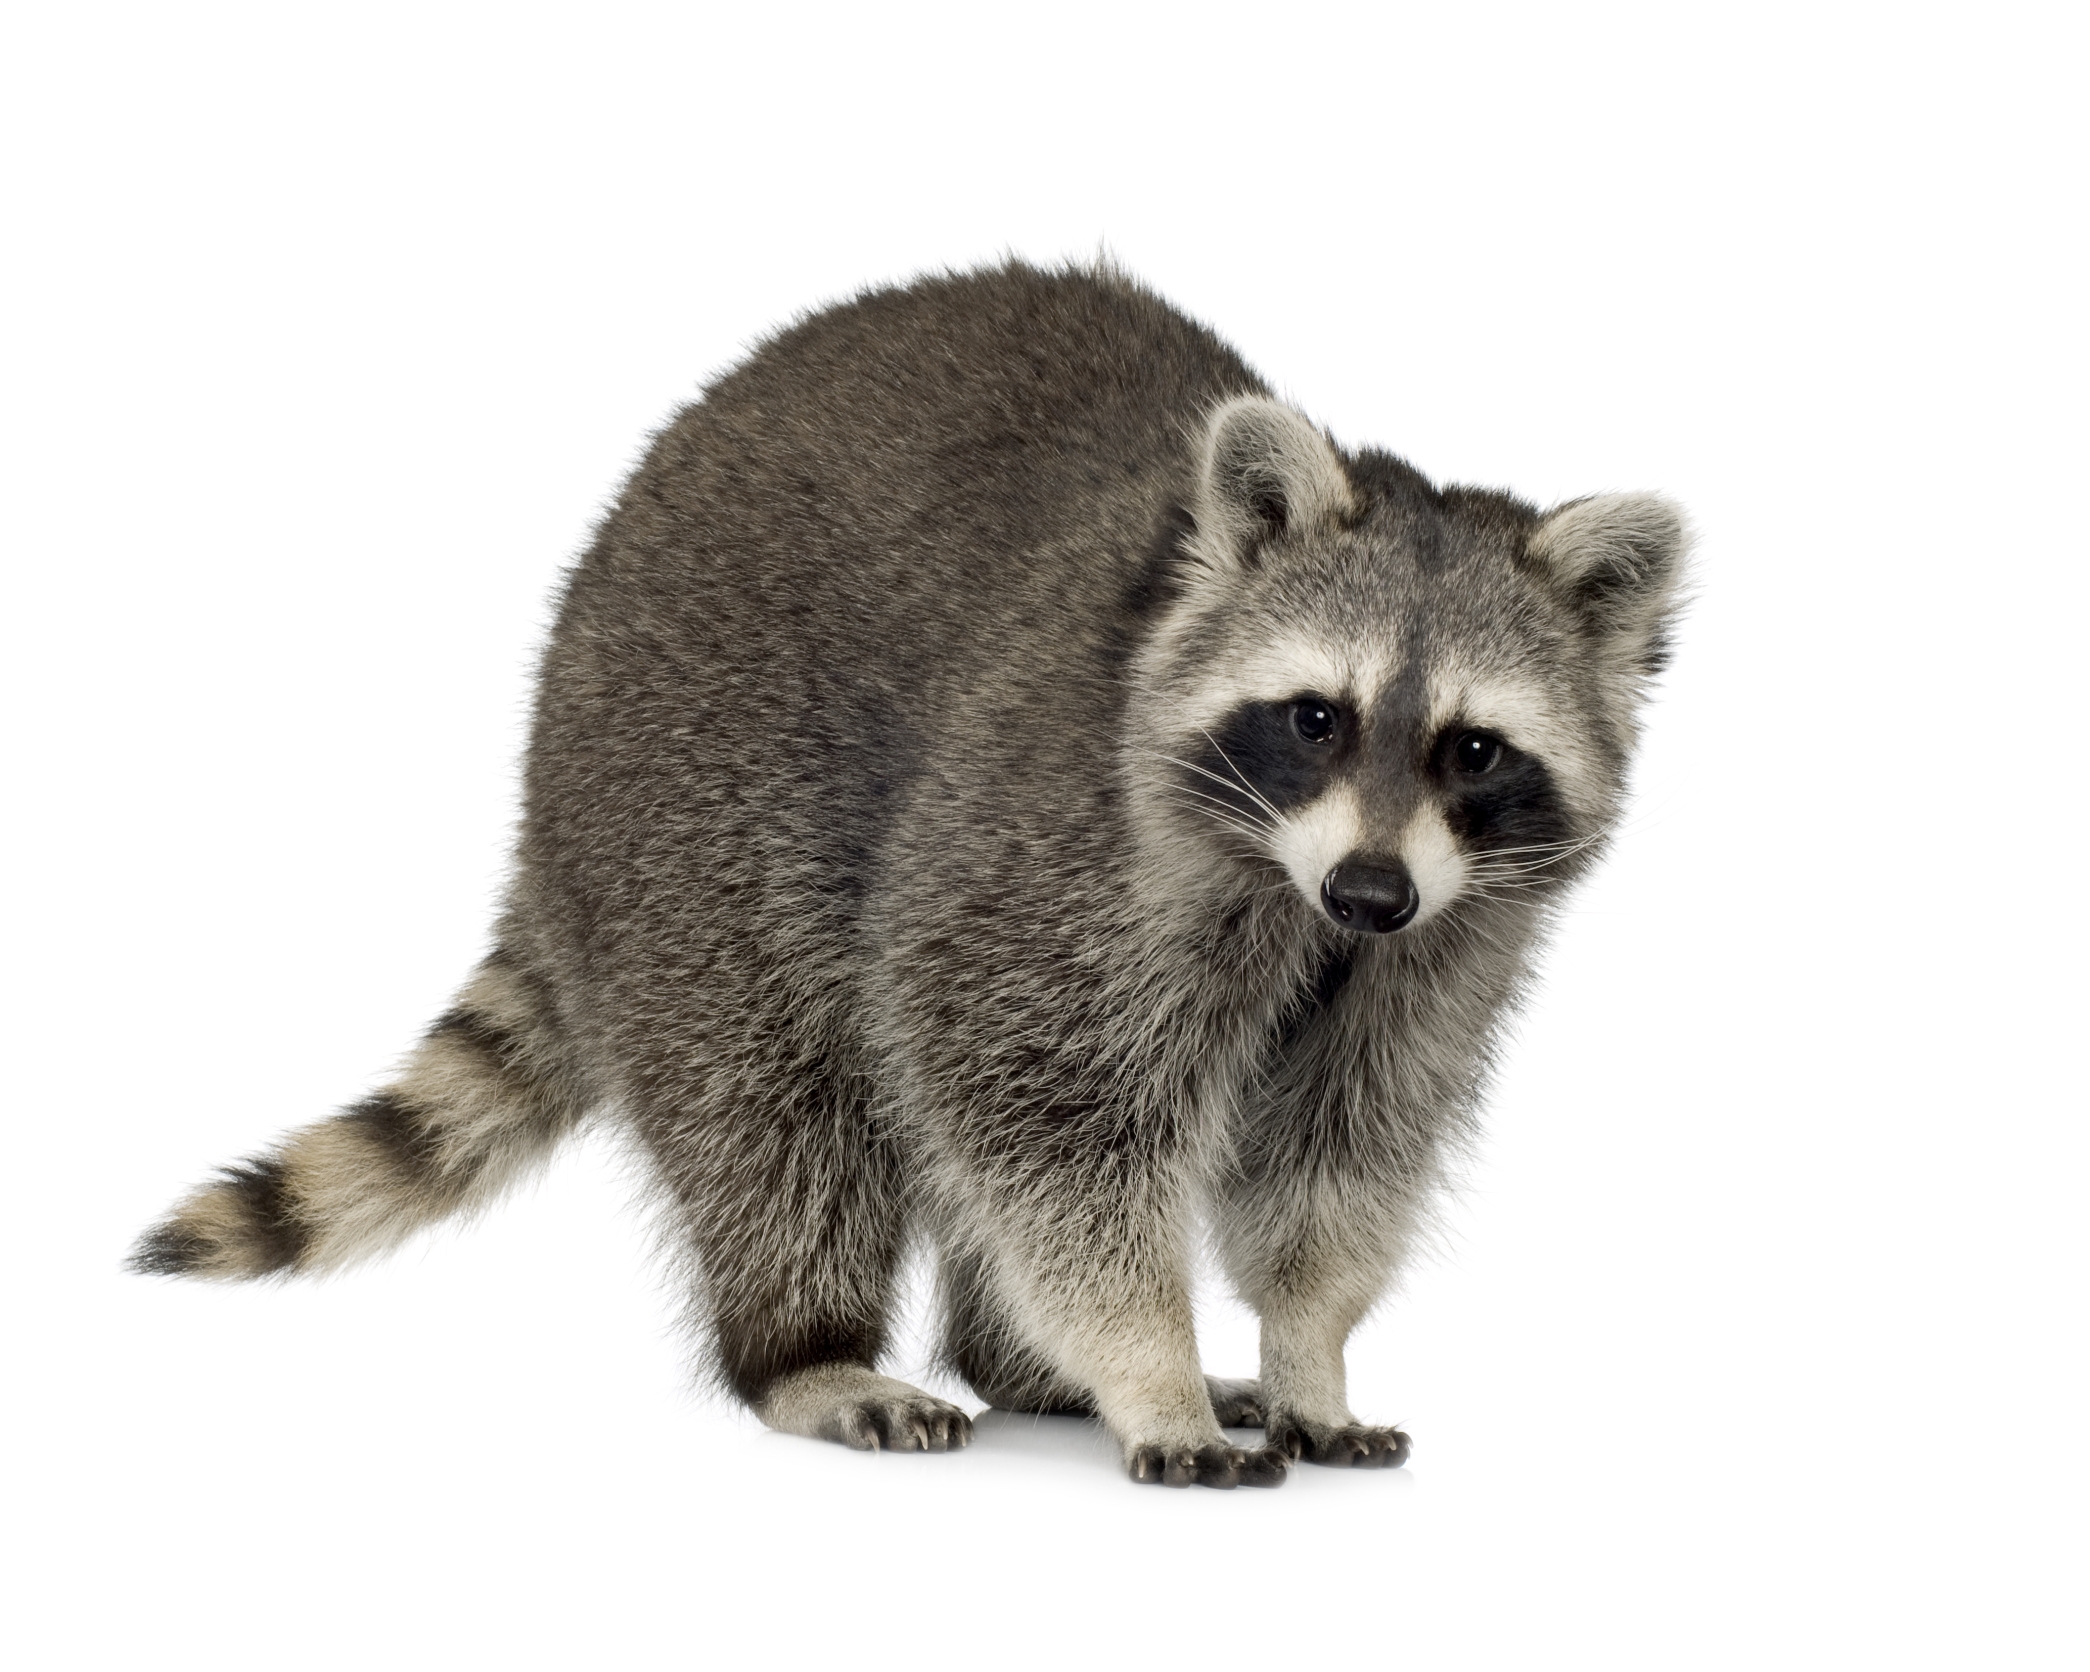 Picture Of Raccoon 1